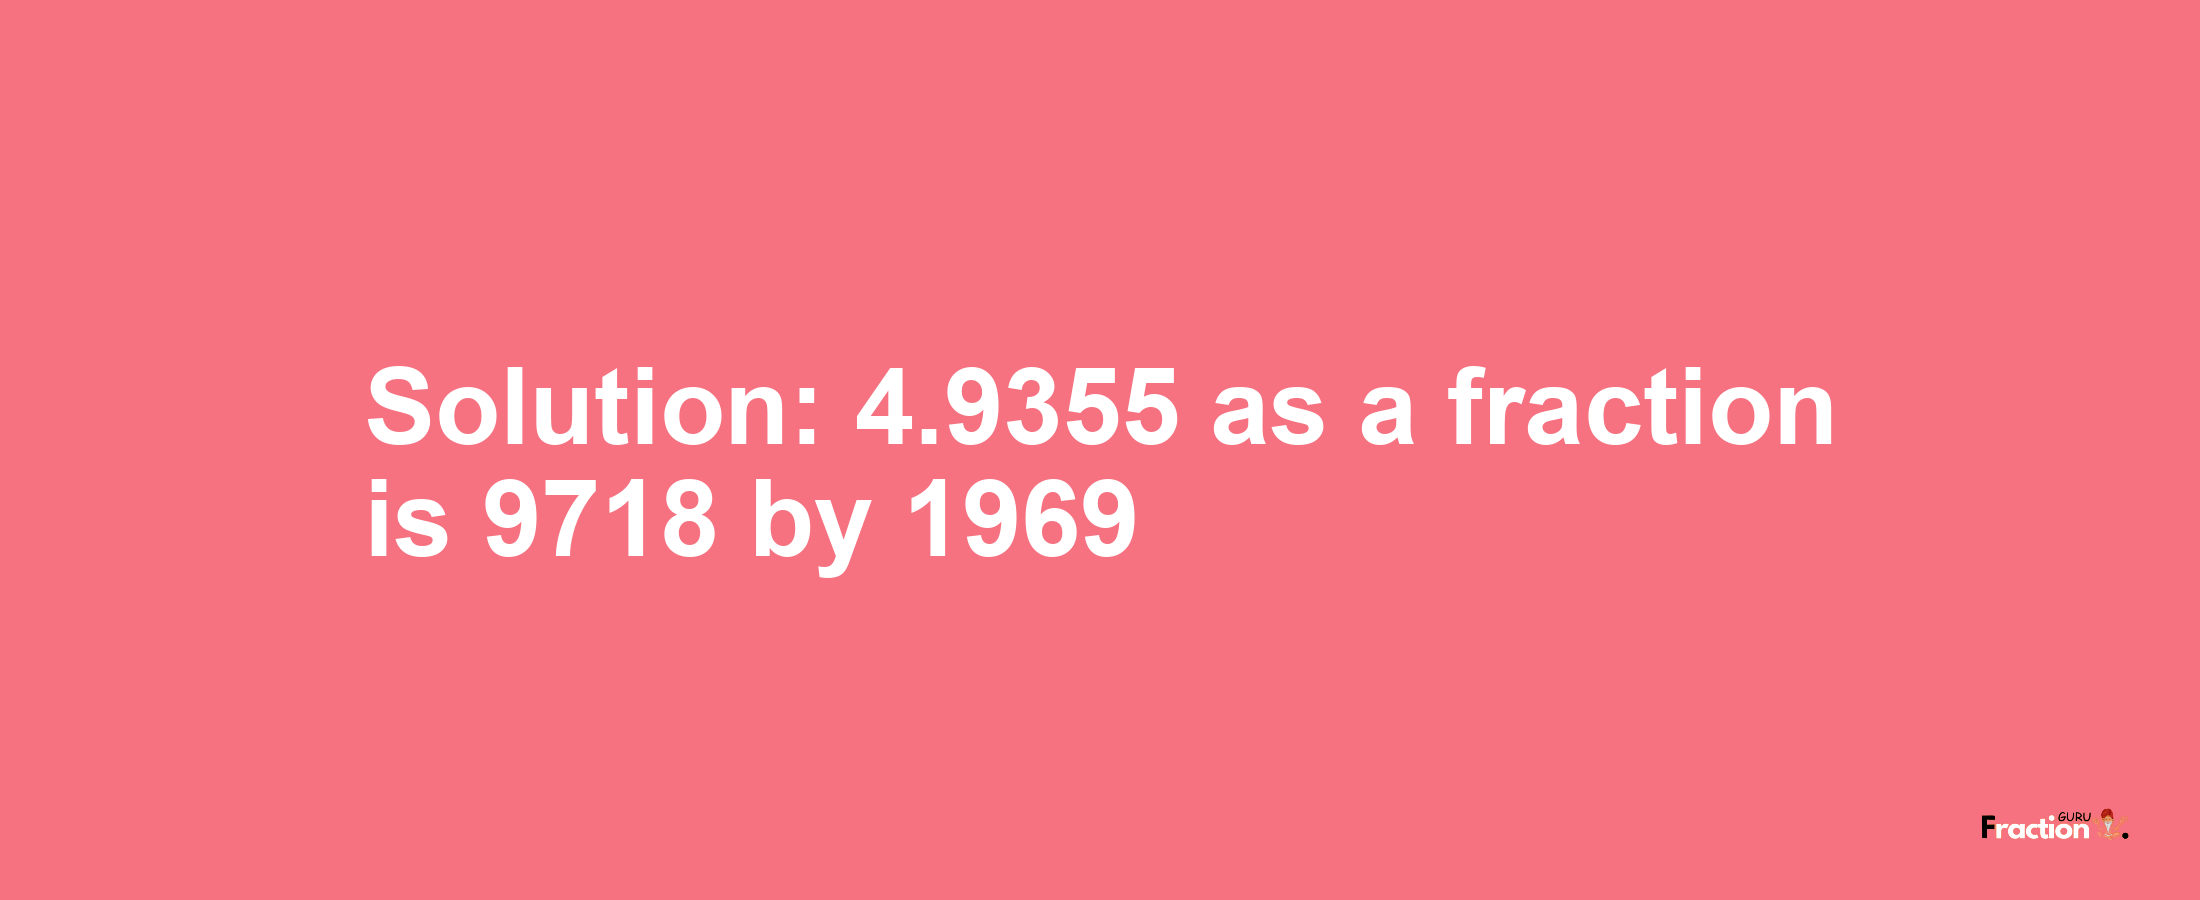 Solution:4.9355 as a fraction is 9718/1969